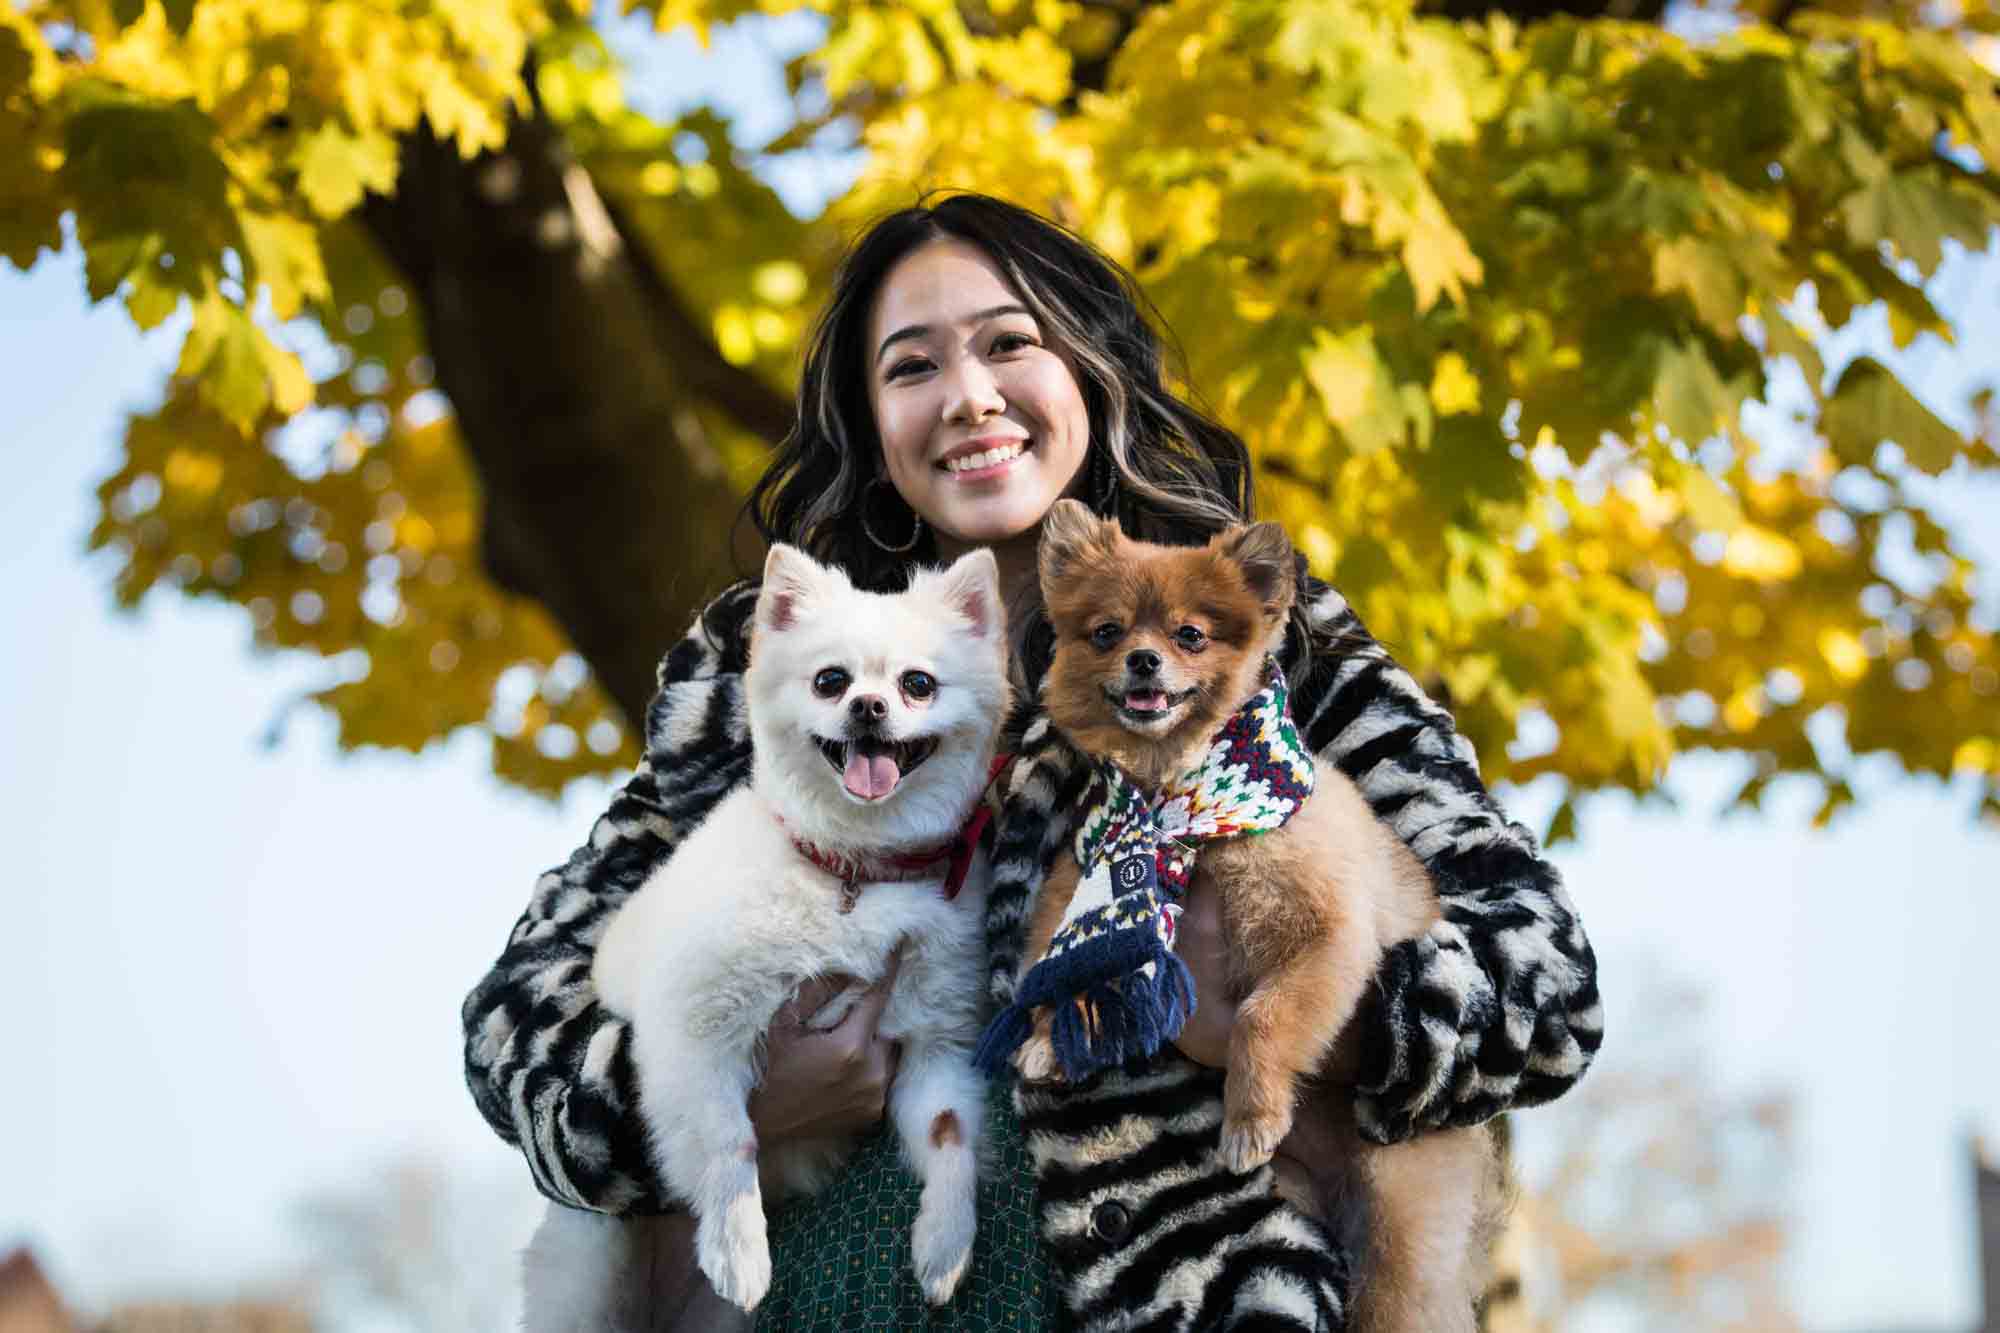 Pet portraits on Governors Island of woman holding two Pomeranian dogs under tree with yellow leaves